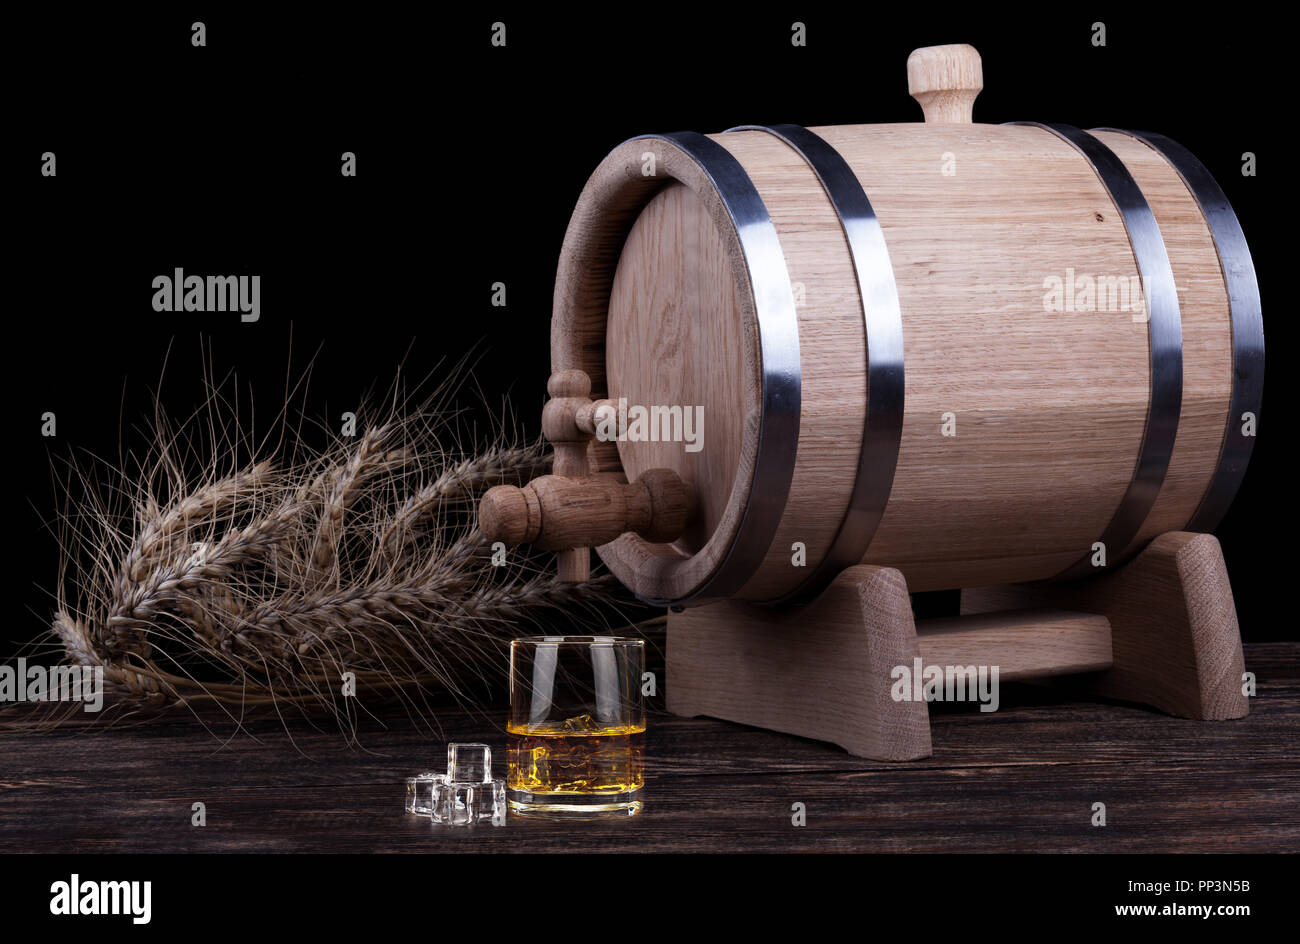 Wooden barrel with rye crops on wooden table close up Stock Photo